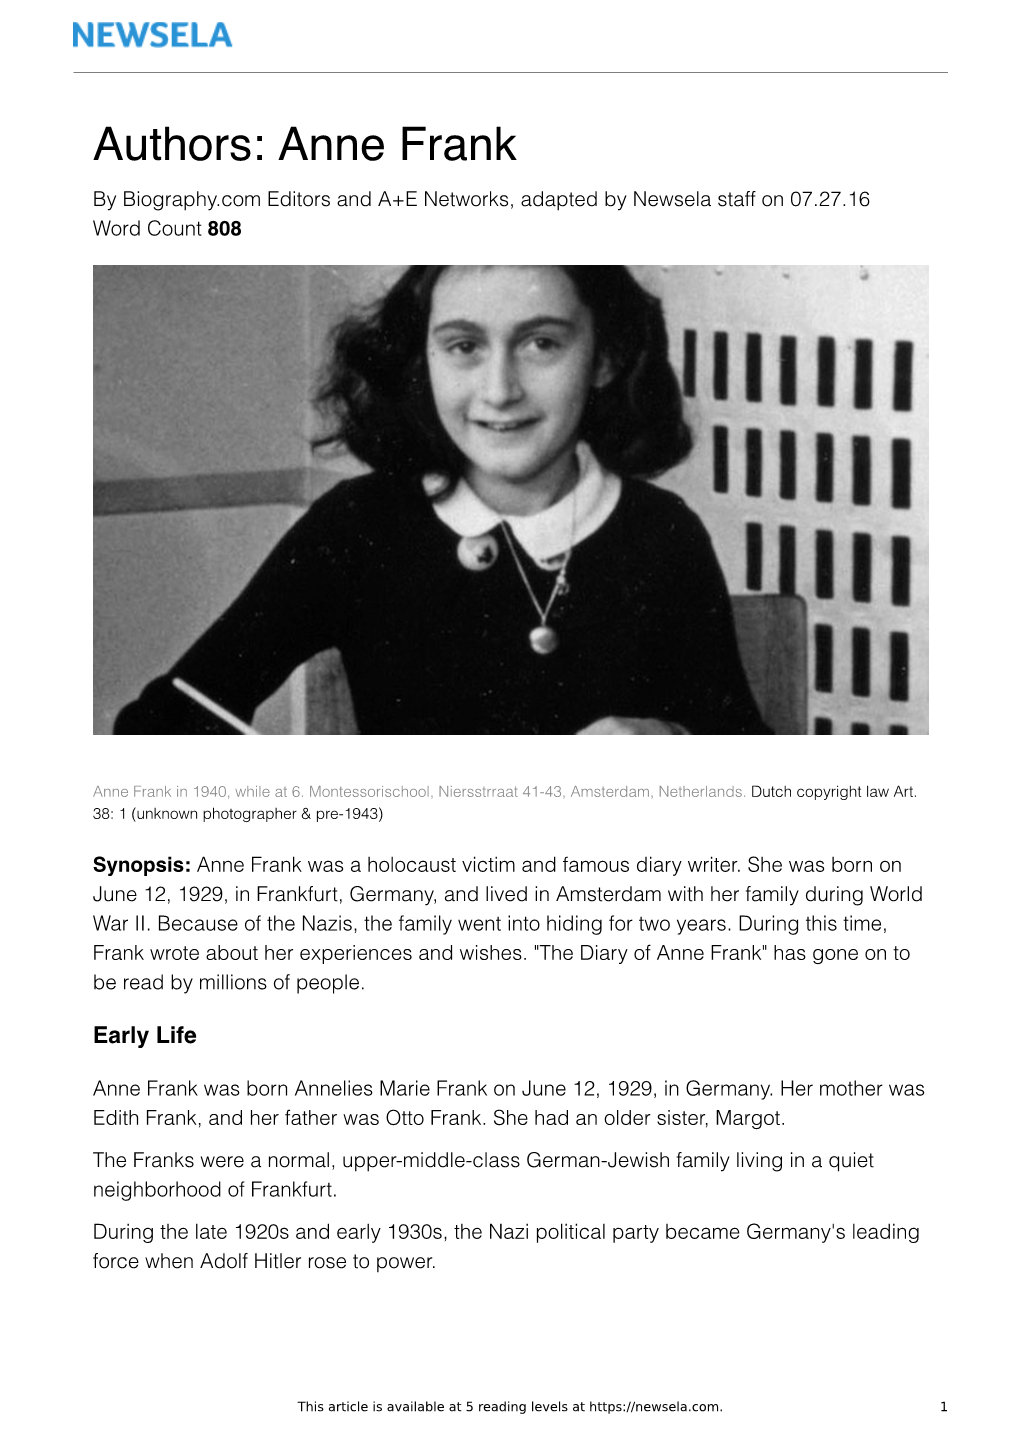 Authors: Anne Frank by Biography.Com Editors and A+E Networks, Adapted by Newsela Staff on 07.27.16 Word Count 808